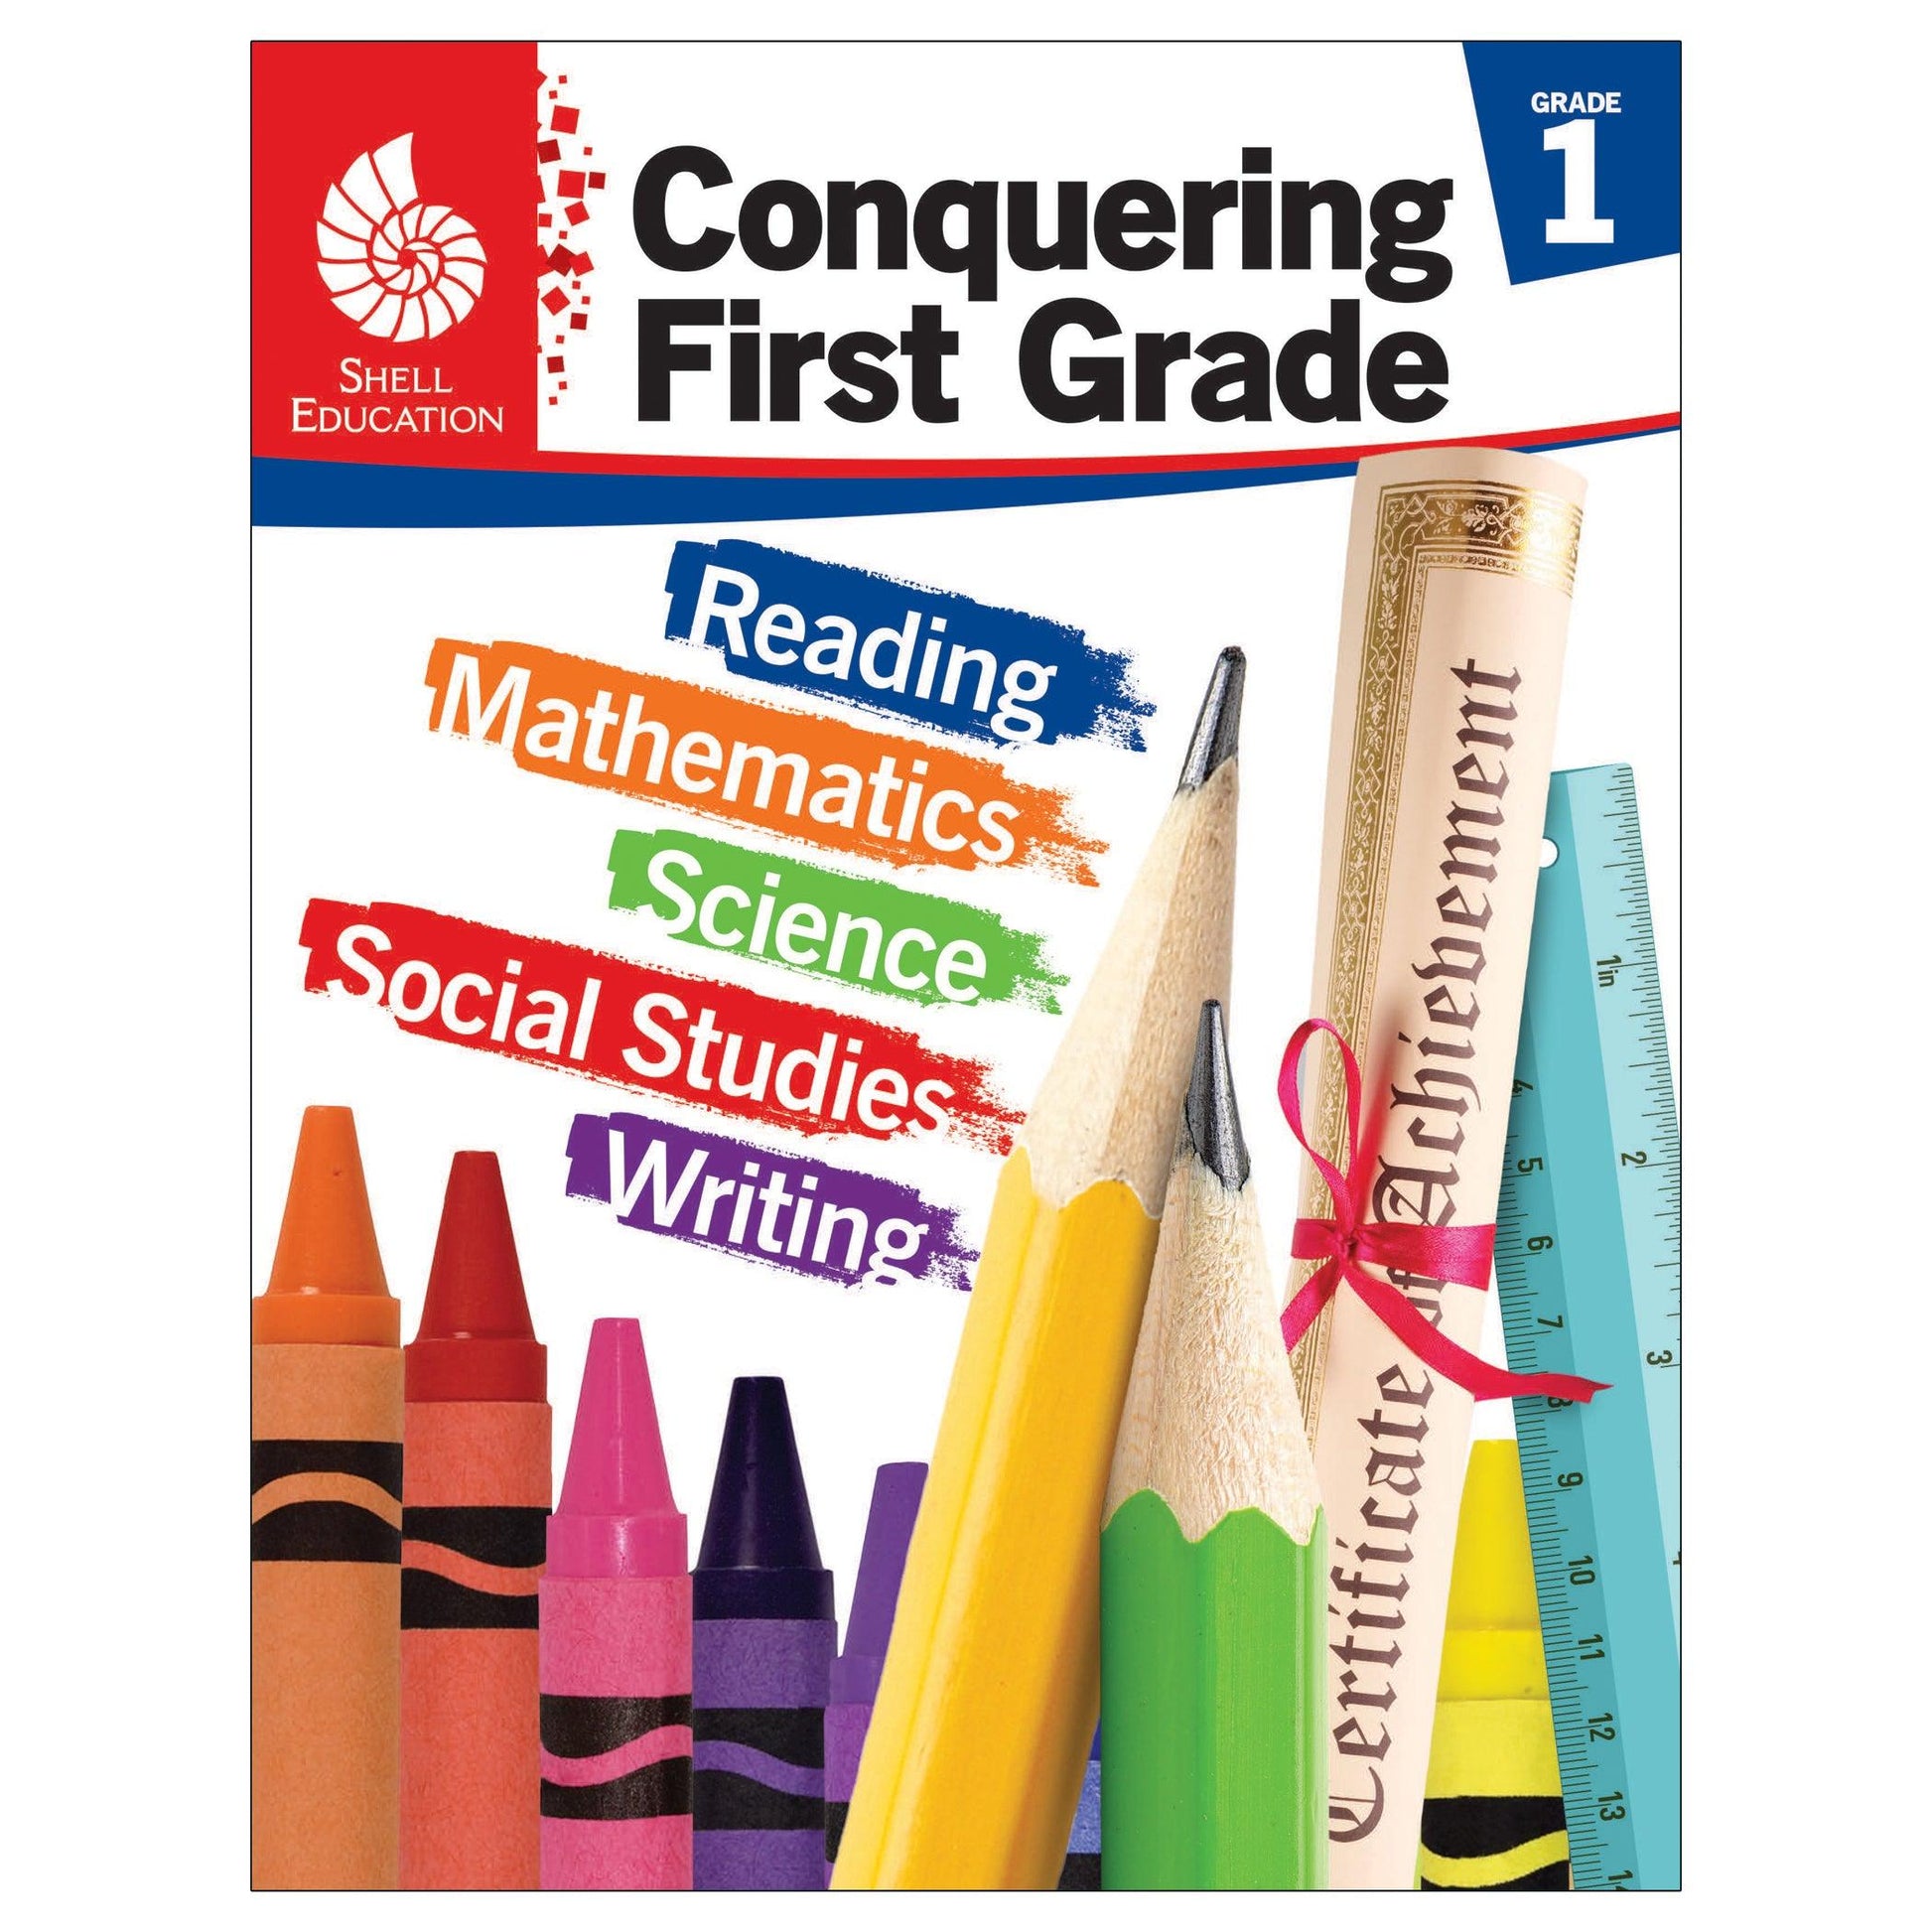 Conquering First Grade - Loomini